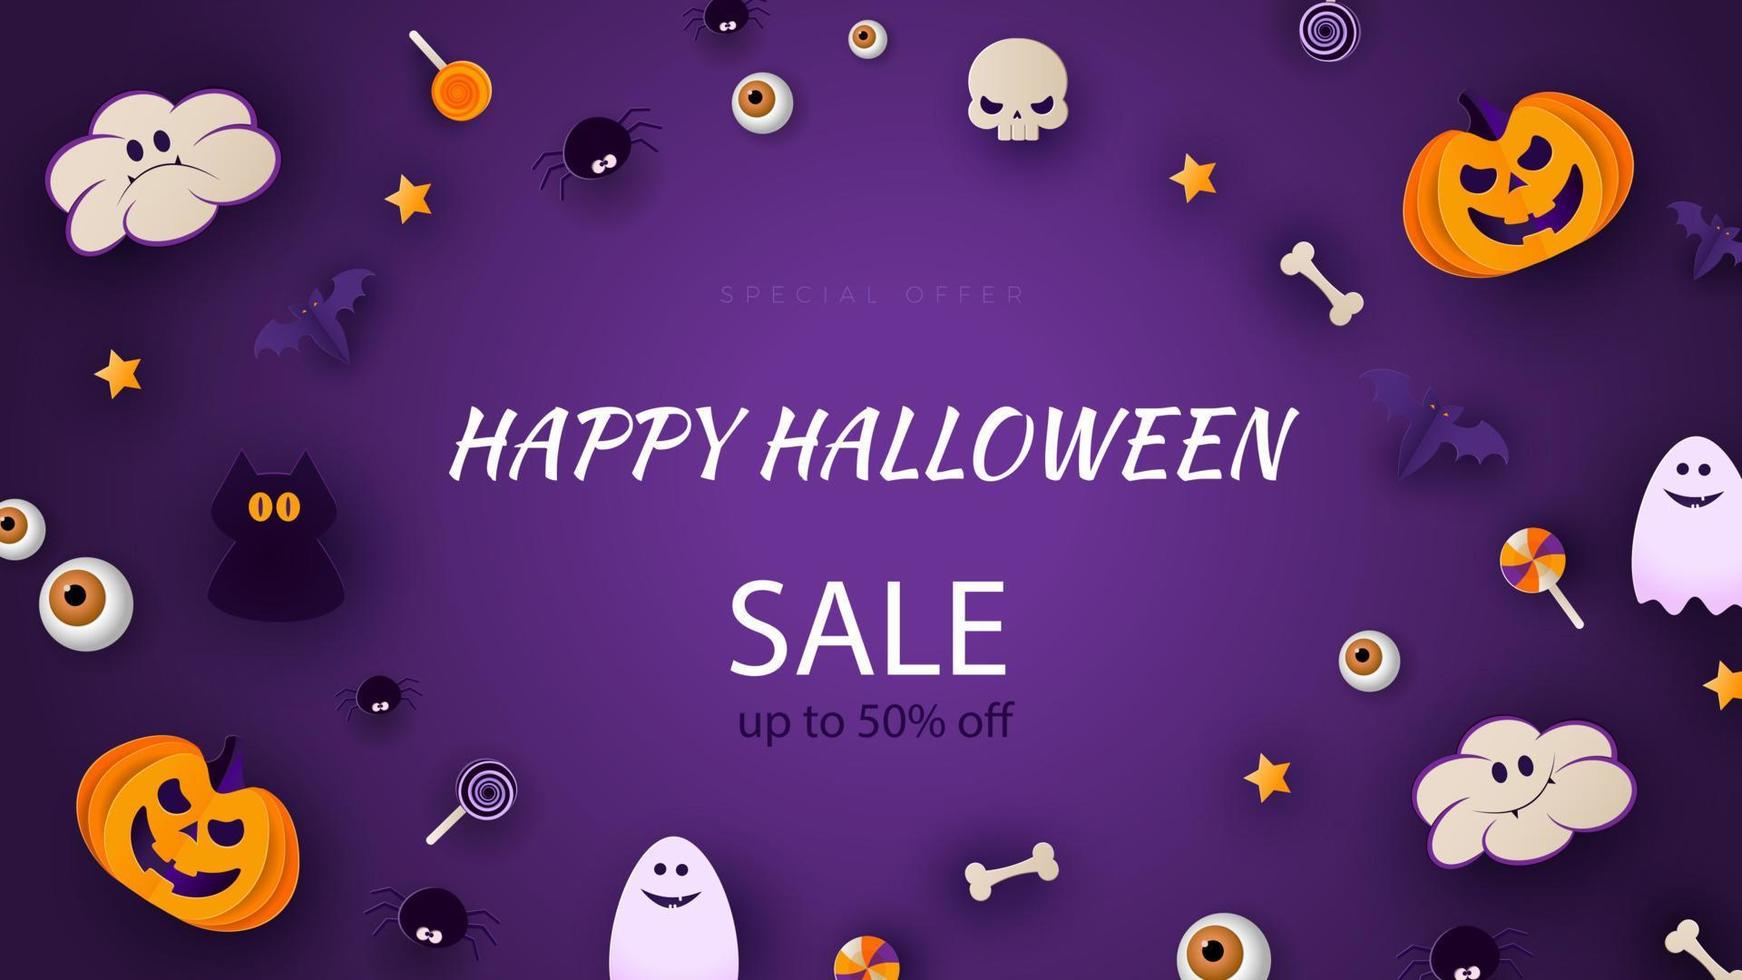 Happy Halloween banner or party invitation background with moon, bats and funny pumpkins in paper cut style. Vector illustration. Purple background